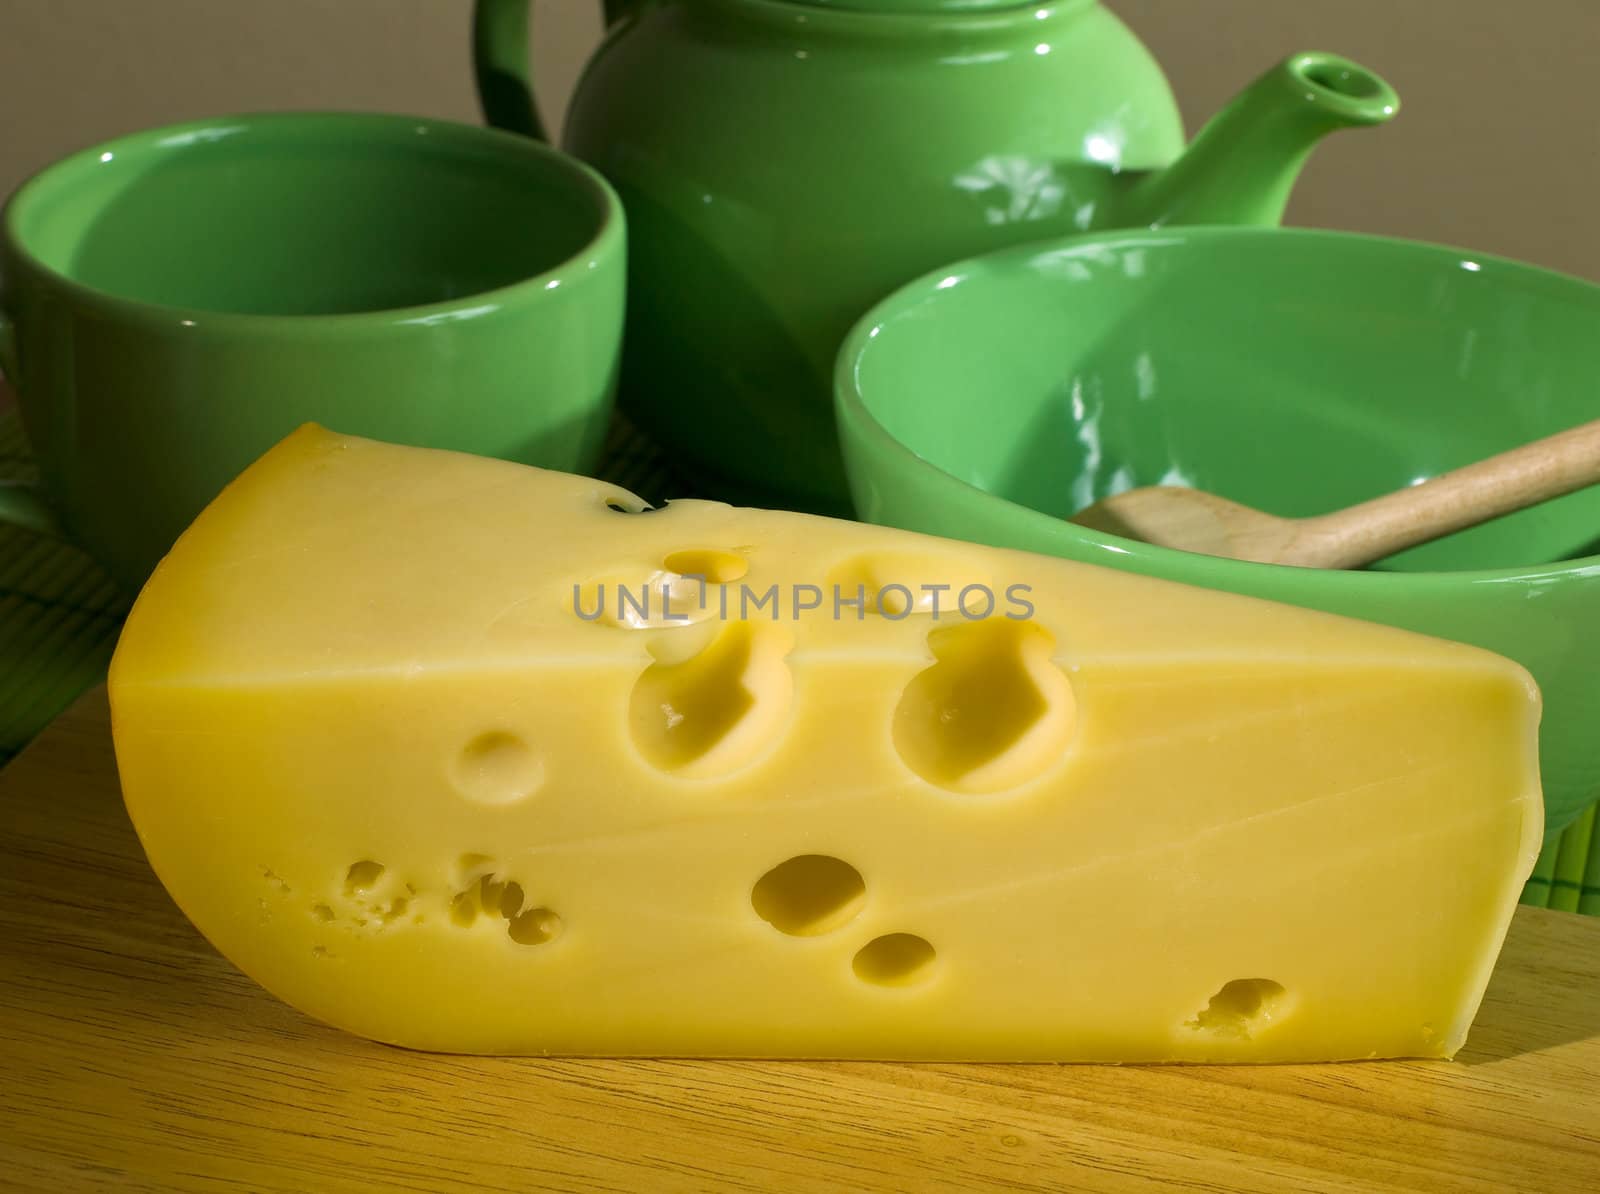 Still Life with cheese and utensils